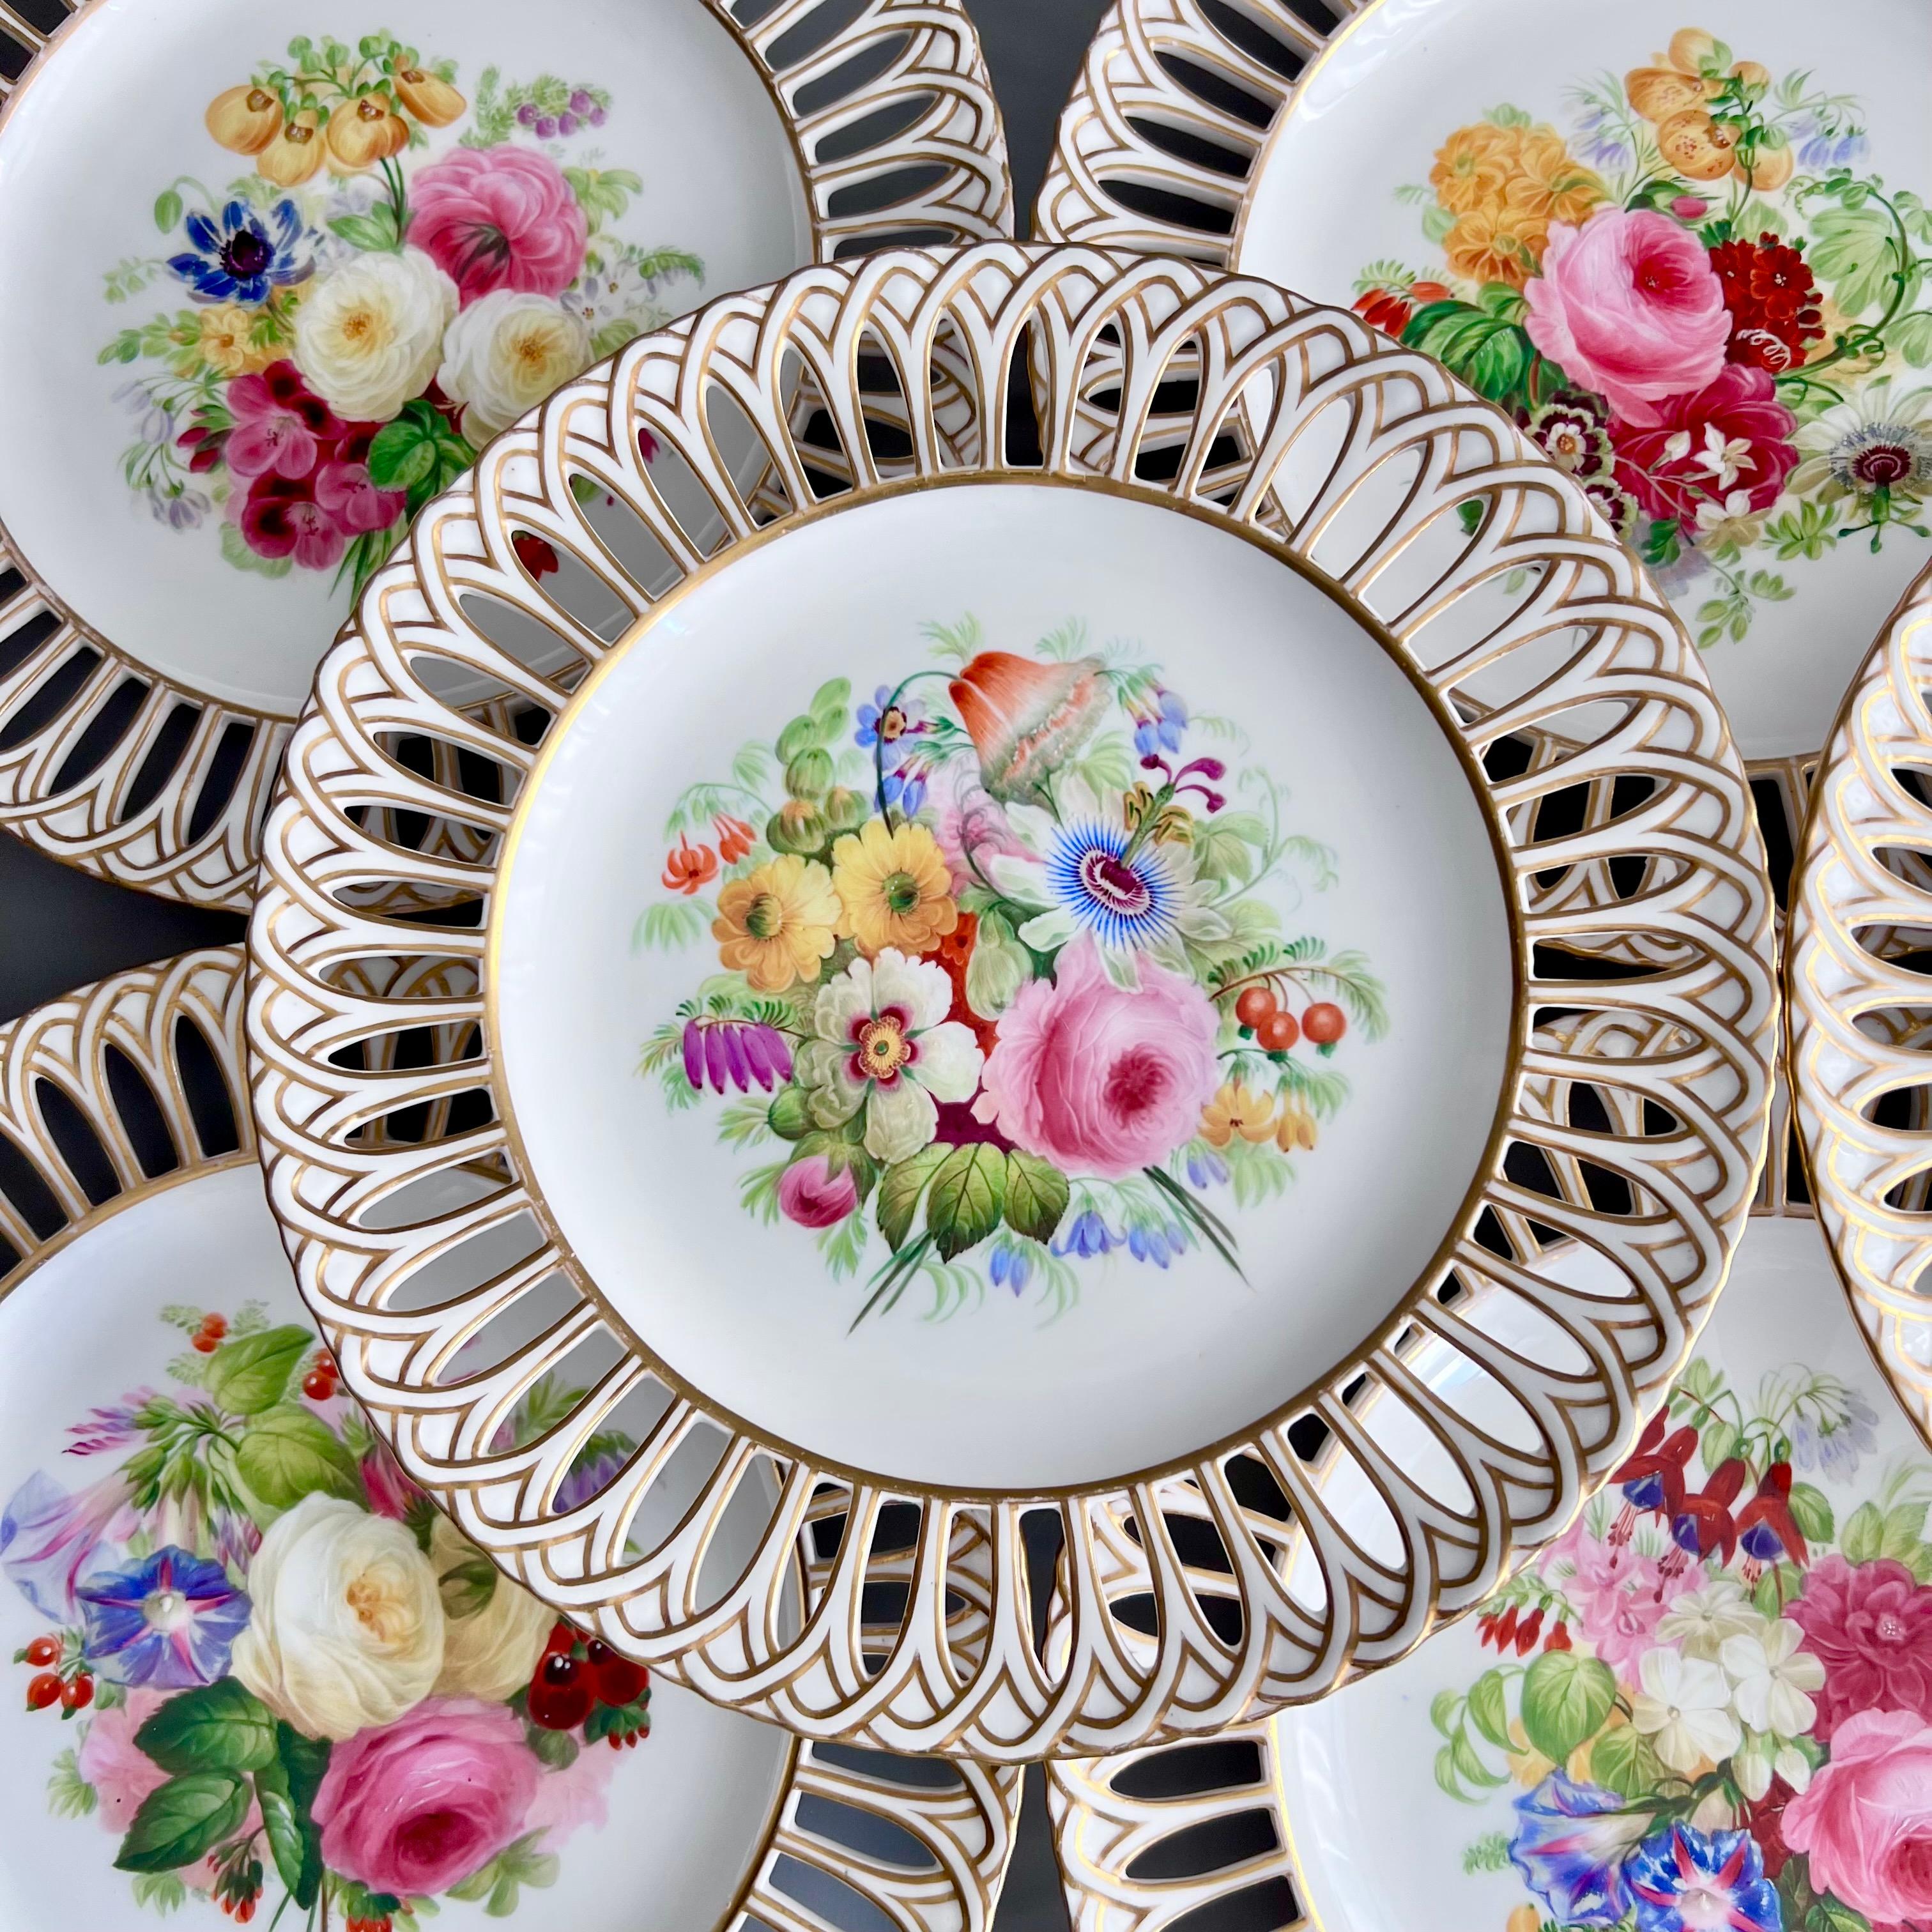 This is a stunning set of 8 reticulated plates made by Copeland in 1848. Each plate is decorated with a unique sublimely painted flower arrangement by the artist Greatbatch. 

We have a second set of 8 of these plates available, as well as a few